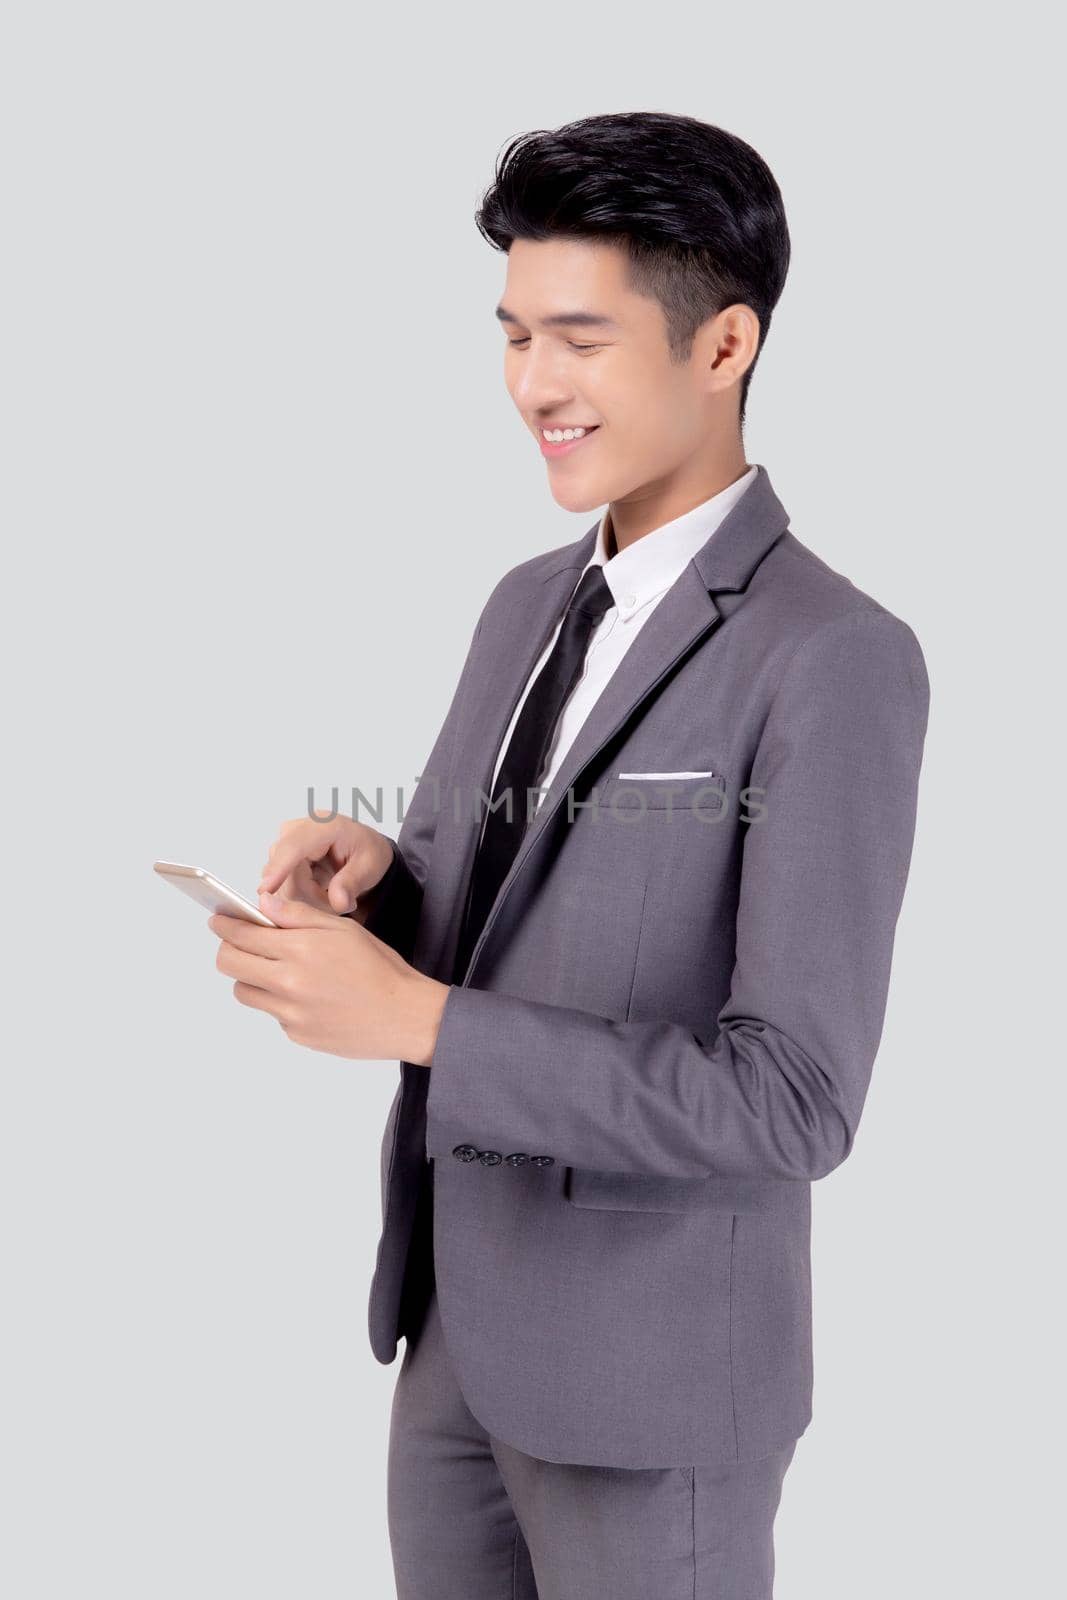 Portrait young asian business man in suit standing using smartphone to internet isolated on white background, businessman confident touch screen mobile phone with success, communication concept. by nnudoo